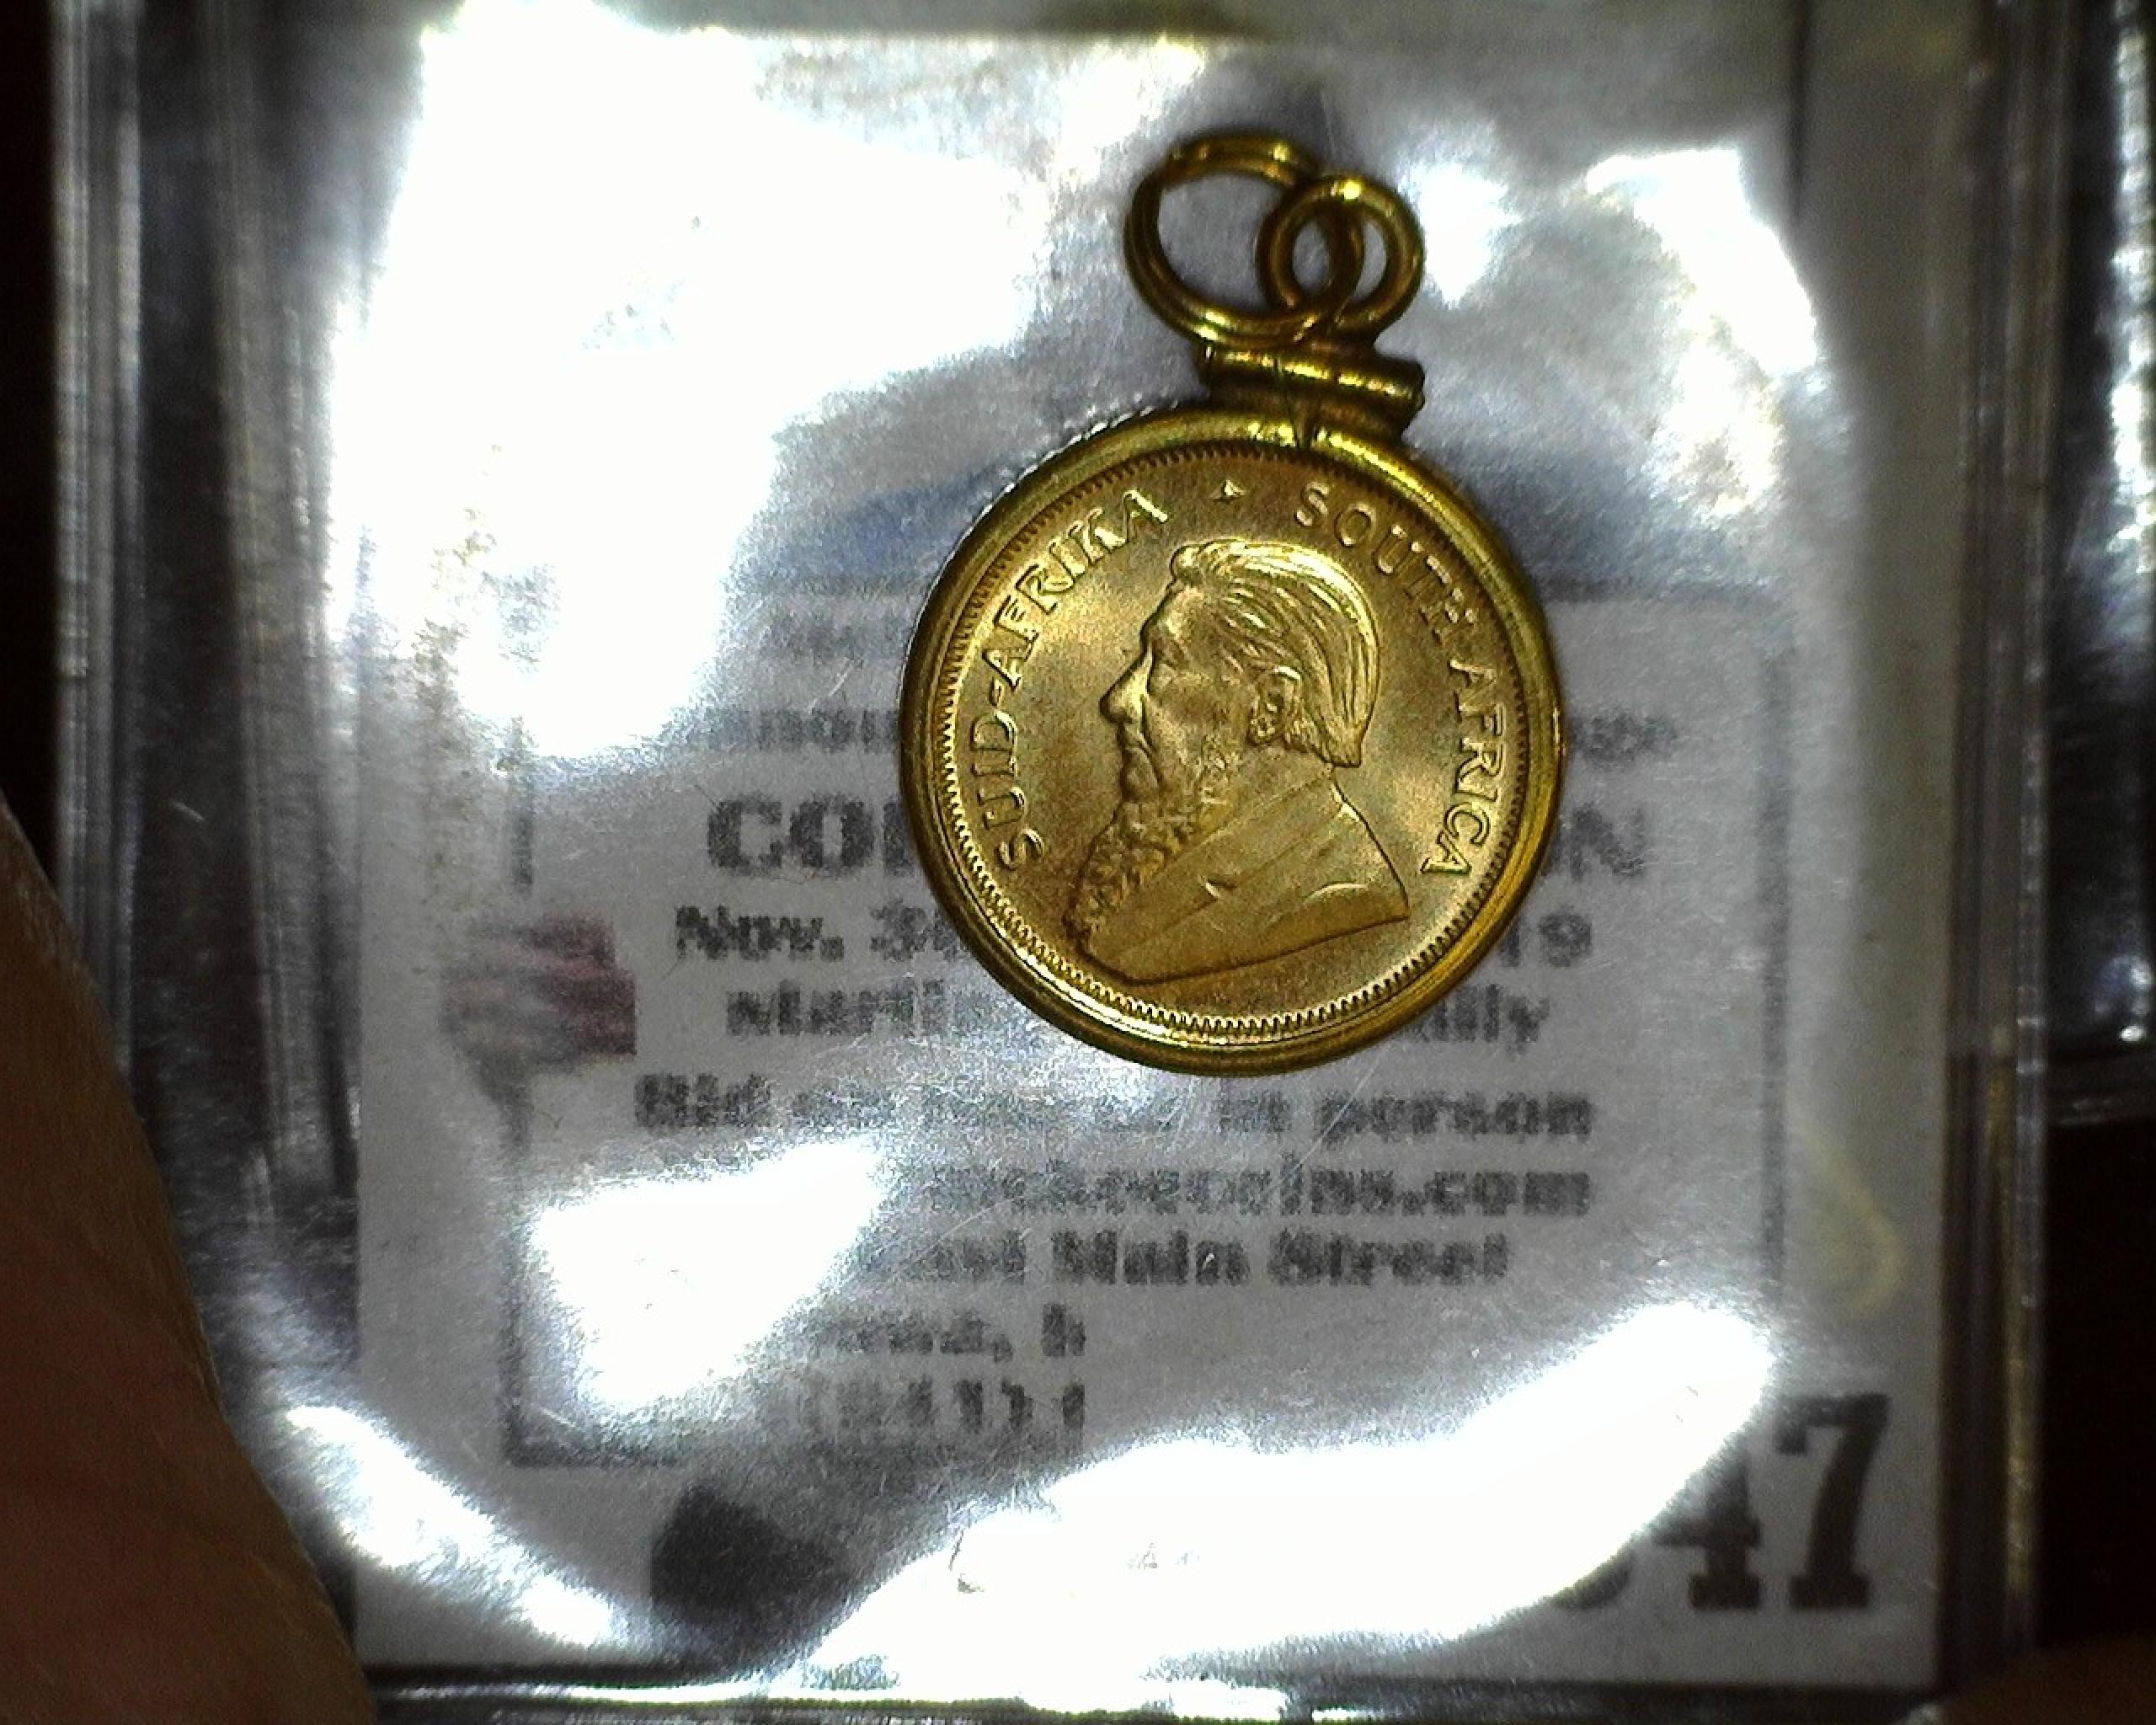 1984 One-Tenth Ounce Gold Krugerrand in a bezel and ready to be suspended from a Necklace.